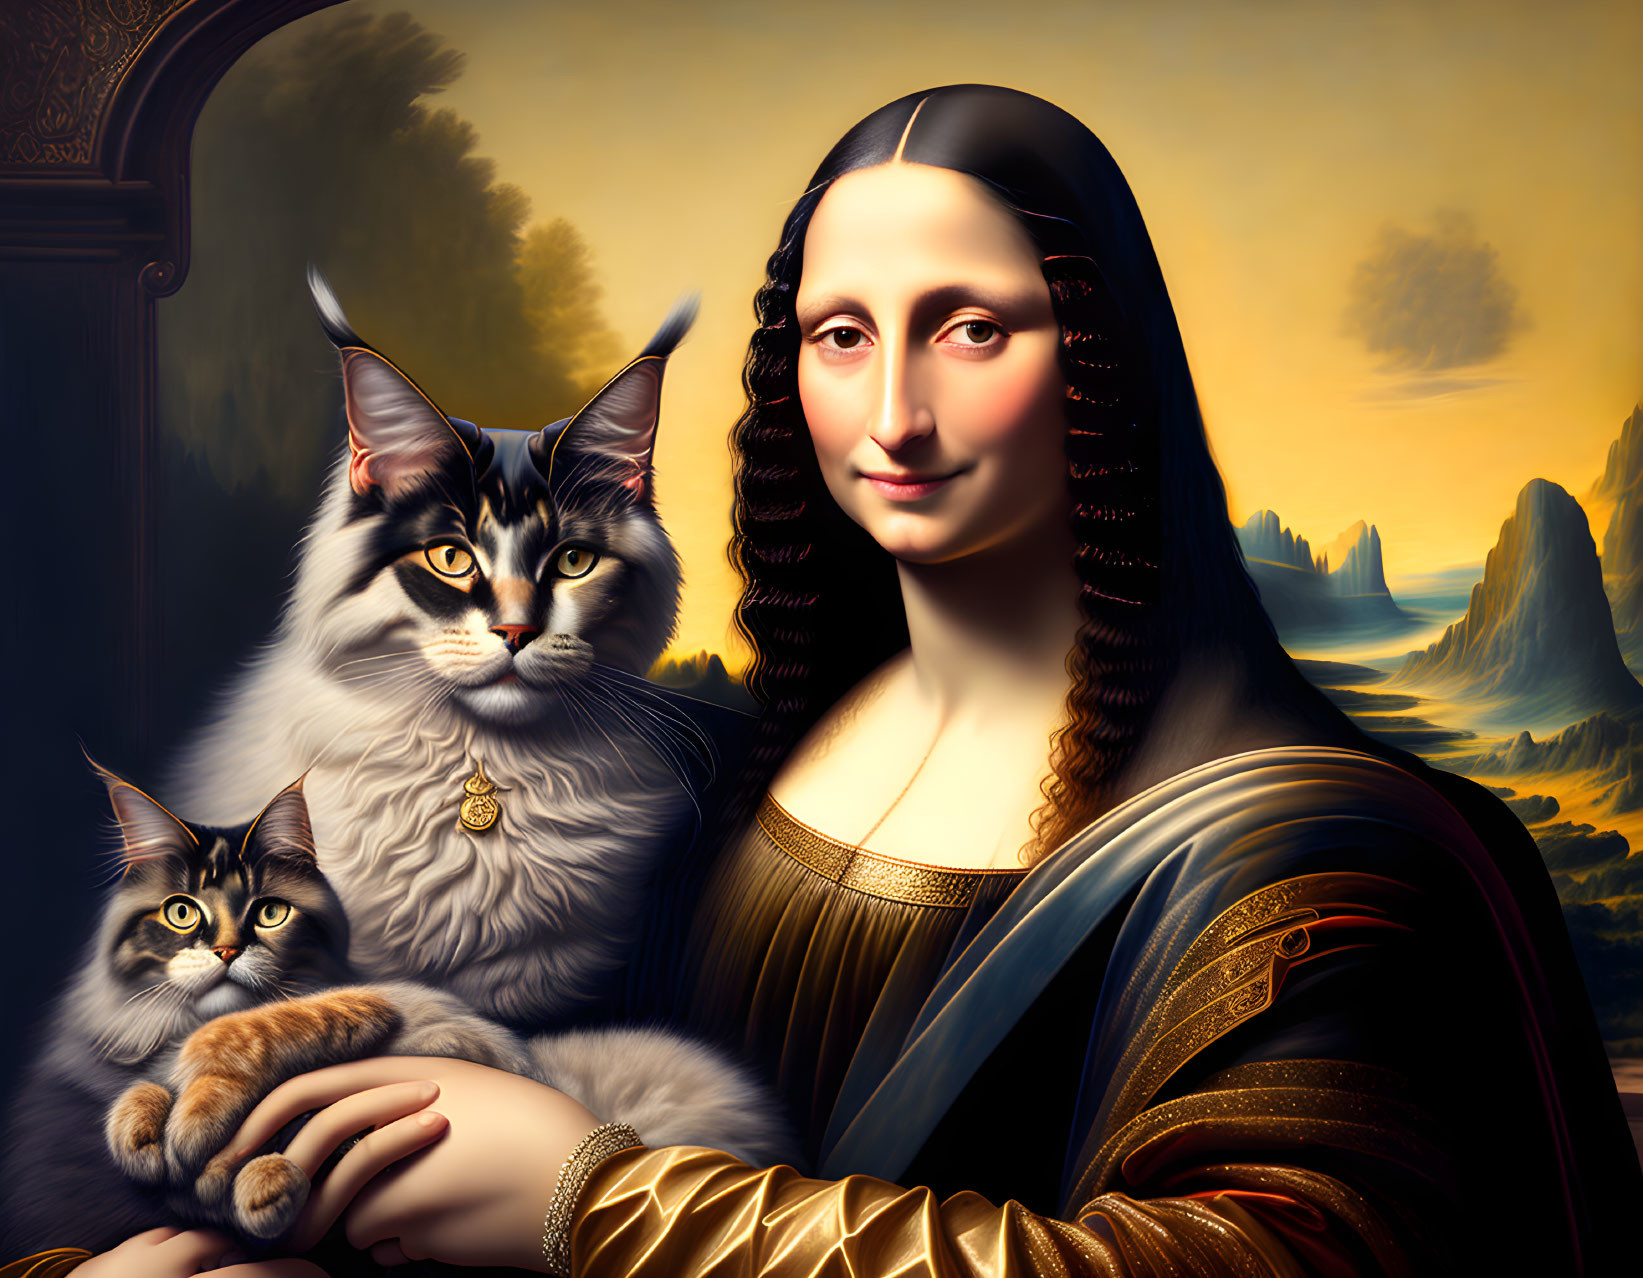 Surreal artwork: Mona Lisa with cats in whimsical landscape